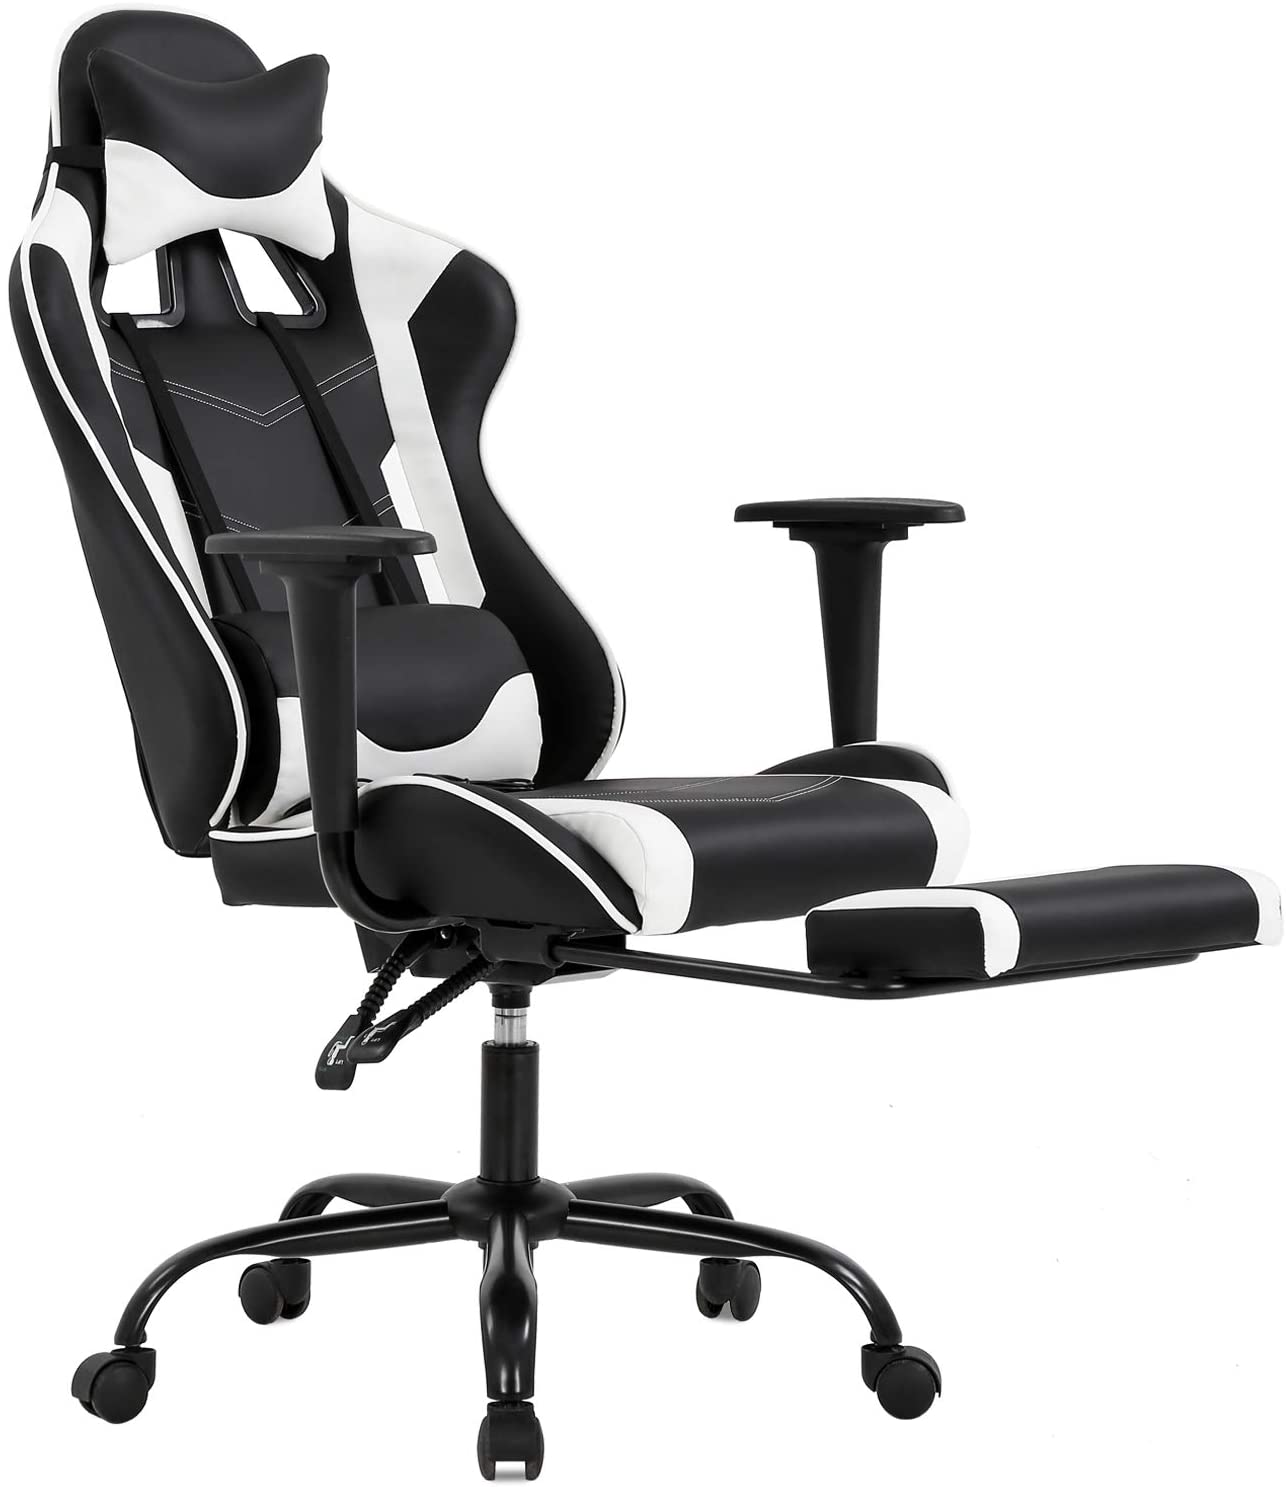 Review of Gaming Chair with Footrest, Ergonomic Office Chair by BestOffice